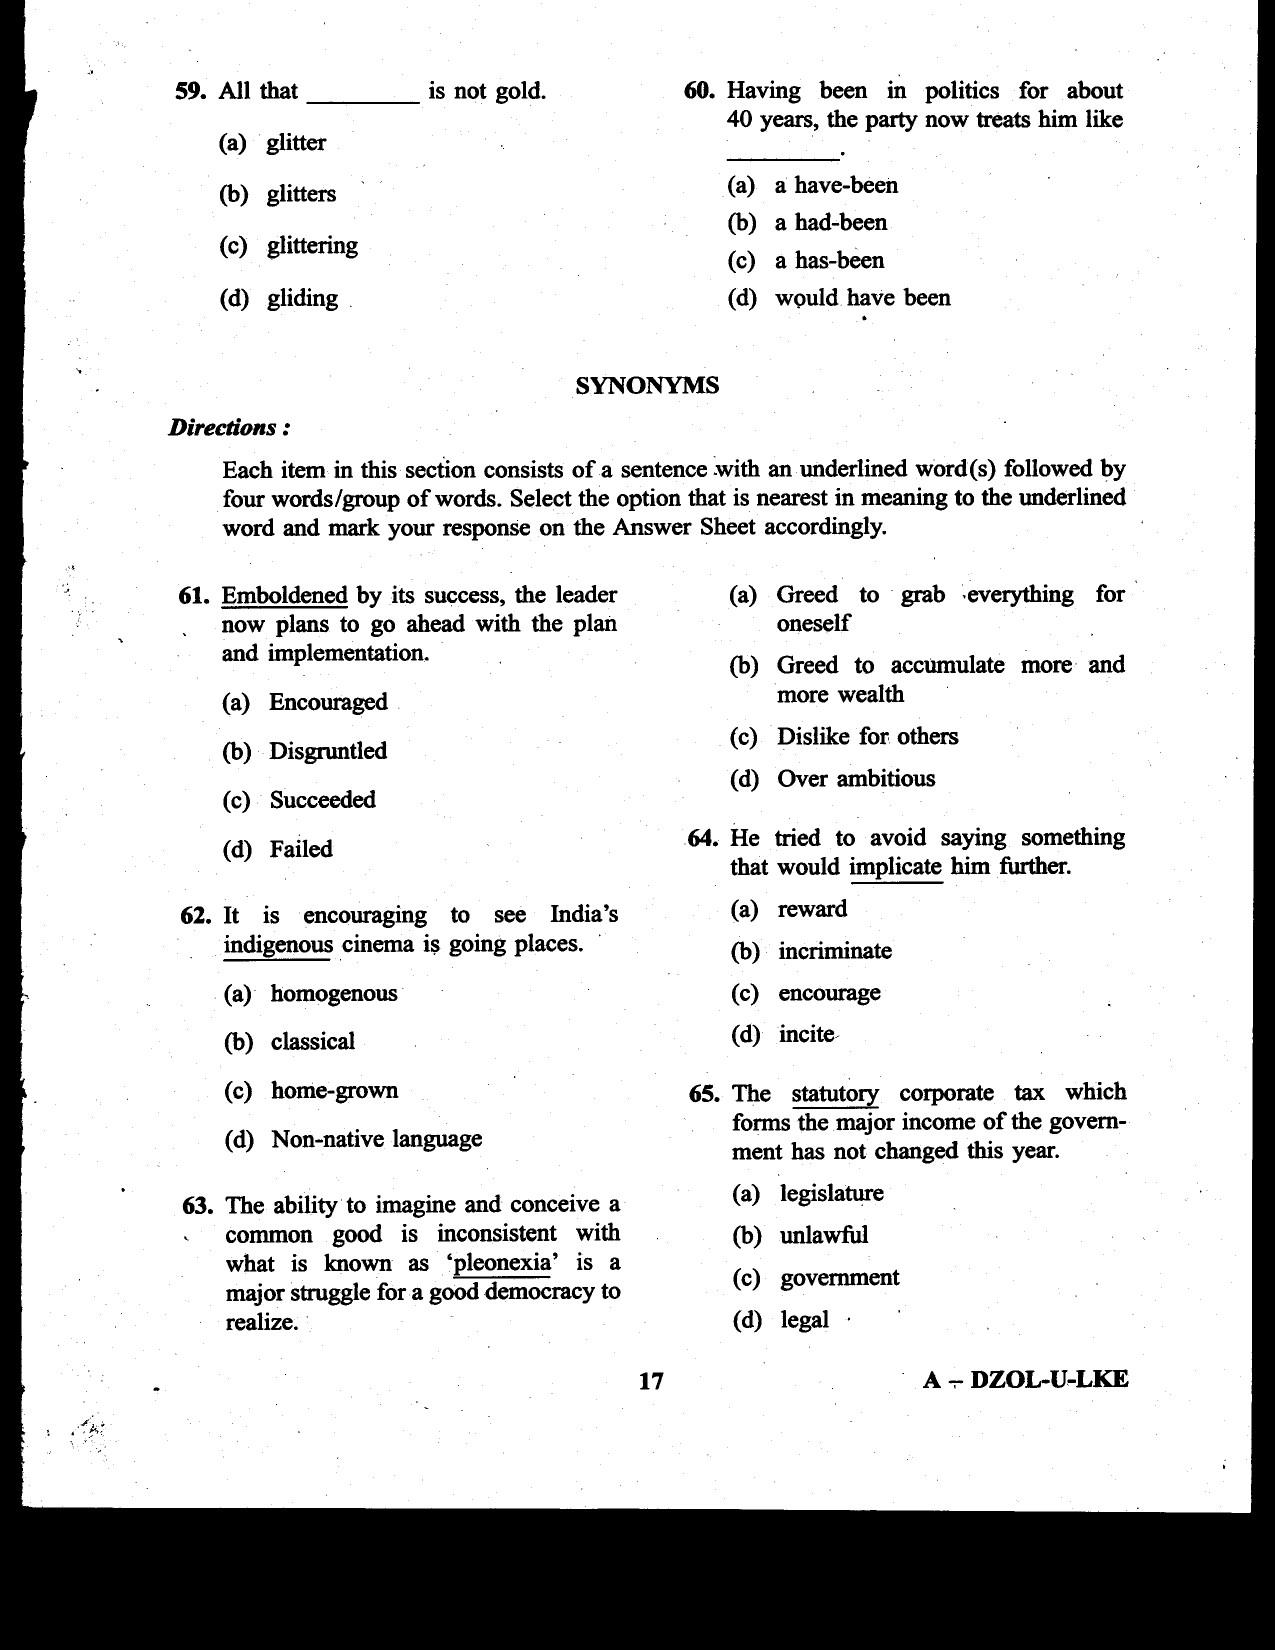 CDS II Examination 2020 English Question Paper - Image 17